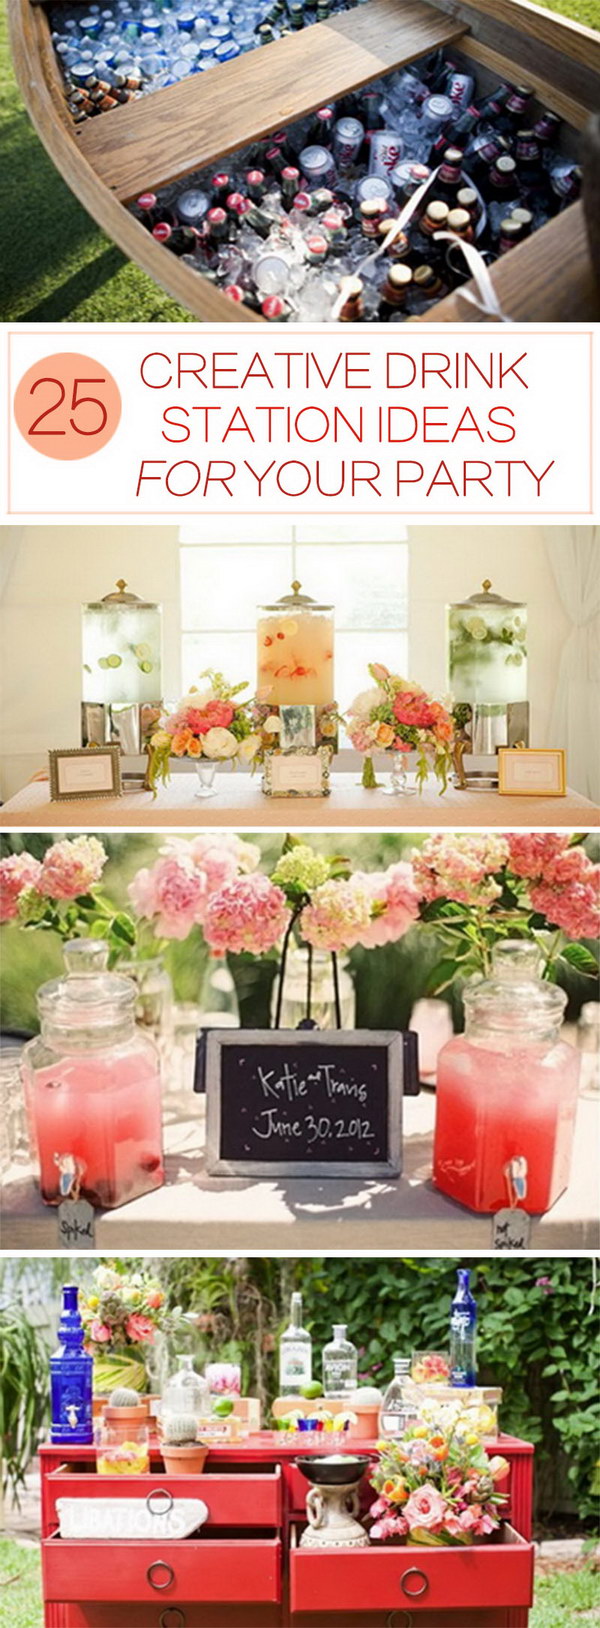 Creative drinking station ideas for your party.